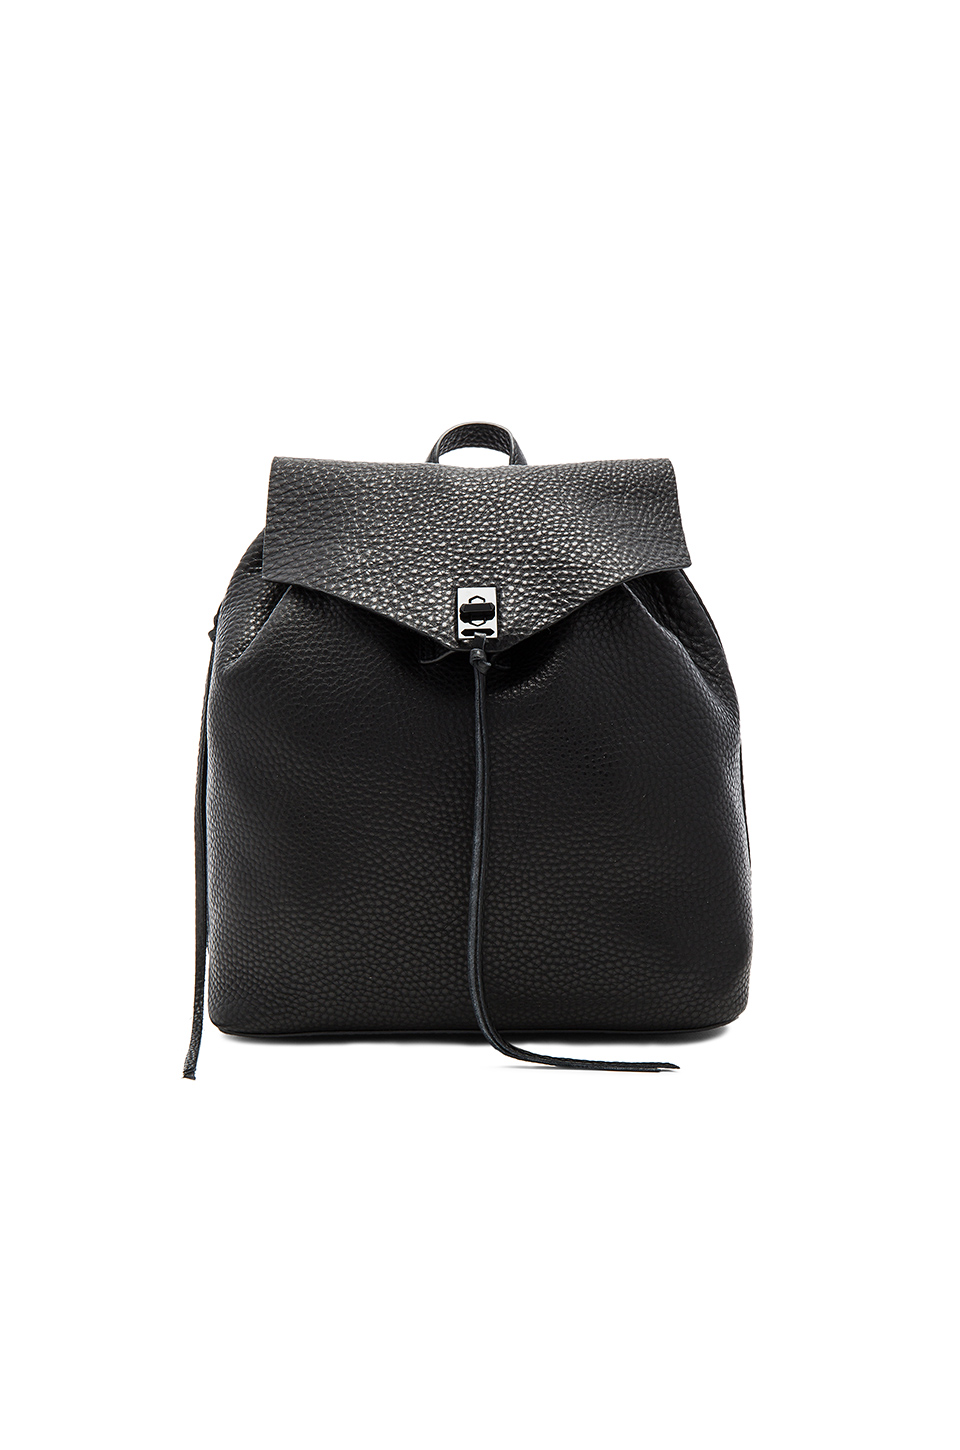 http://www.revolve.com/rebecca-minkoff-darren-backpack/dp/RMIN-WY1038/?d=Womens&page=1&lc=11&itrownum=4&itcurrpage=1&itview=01